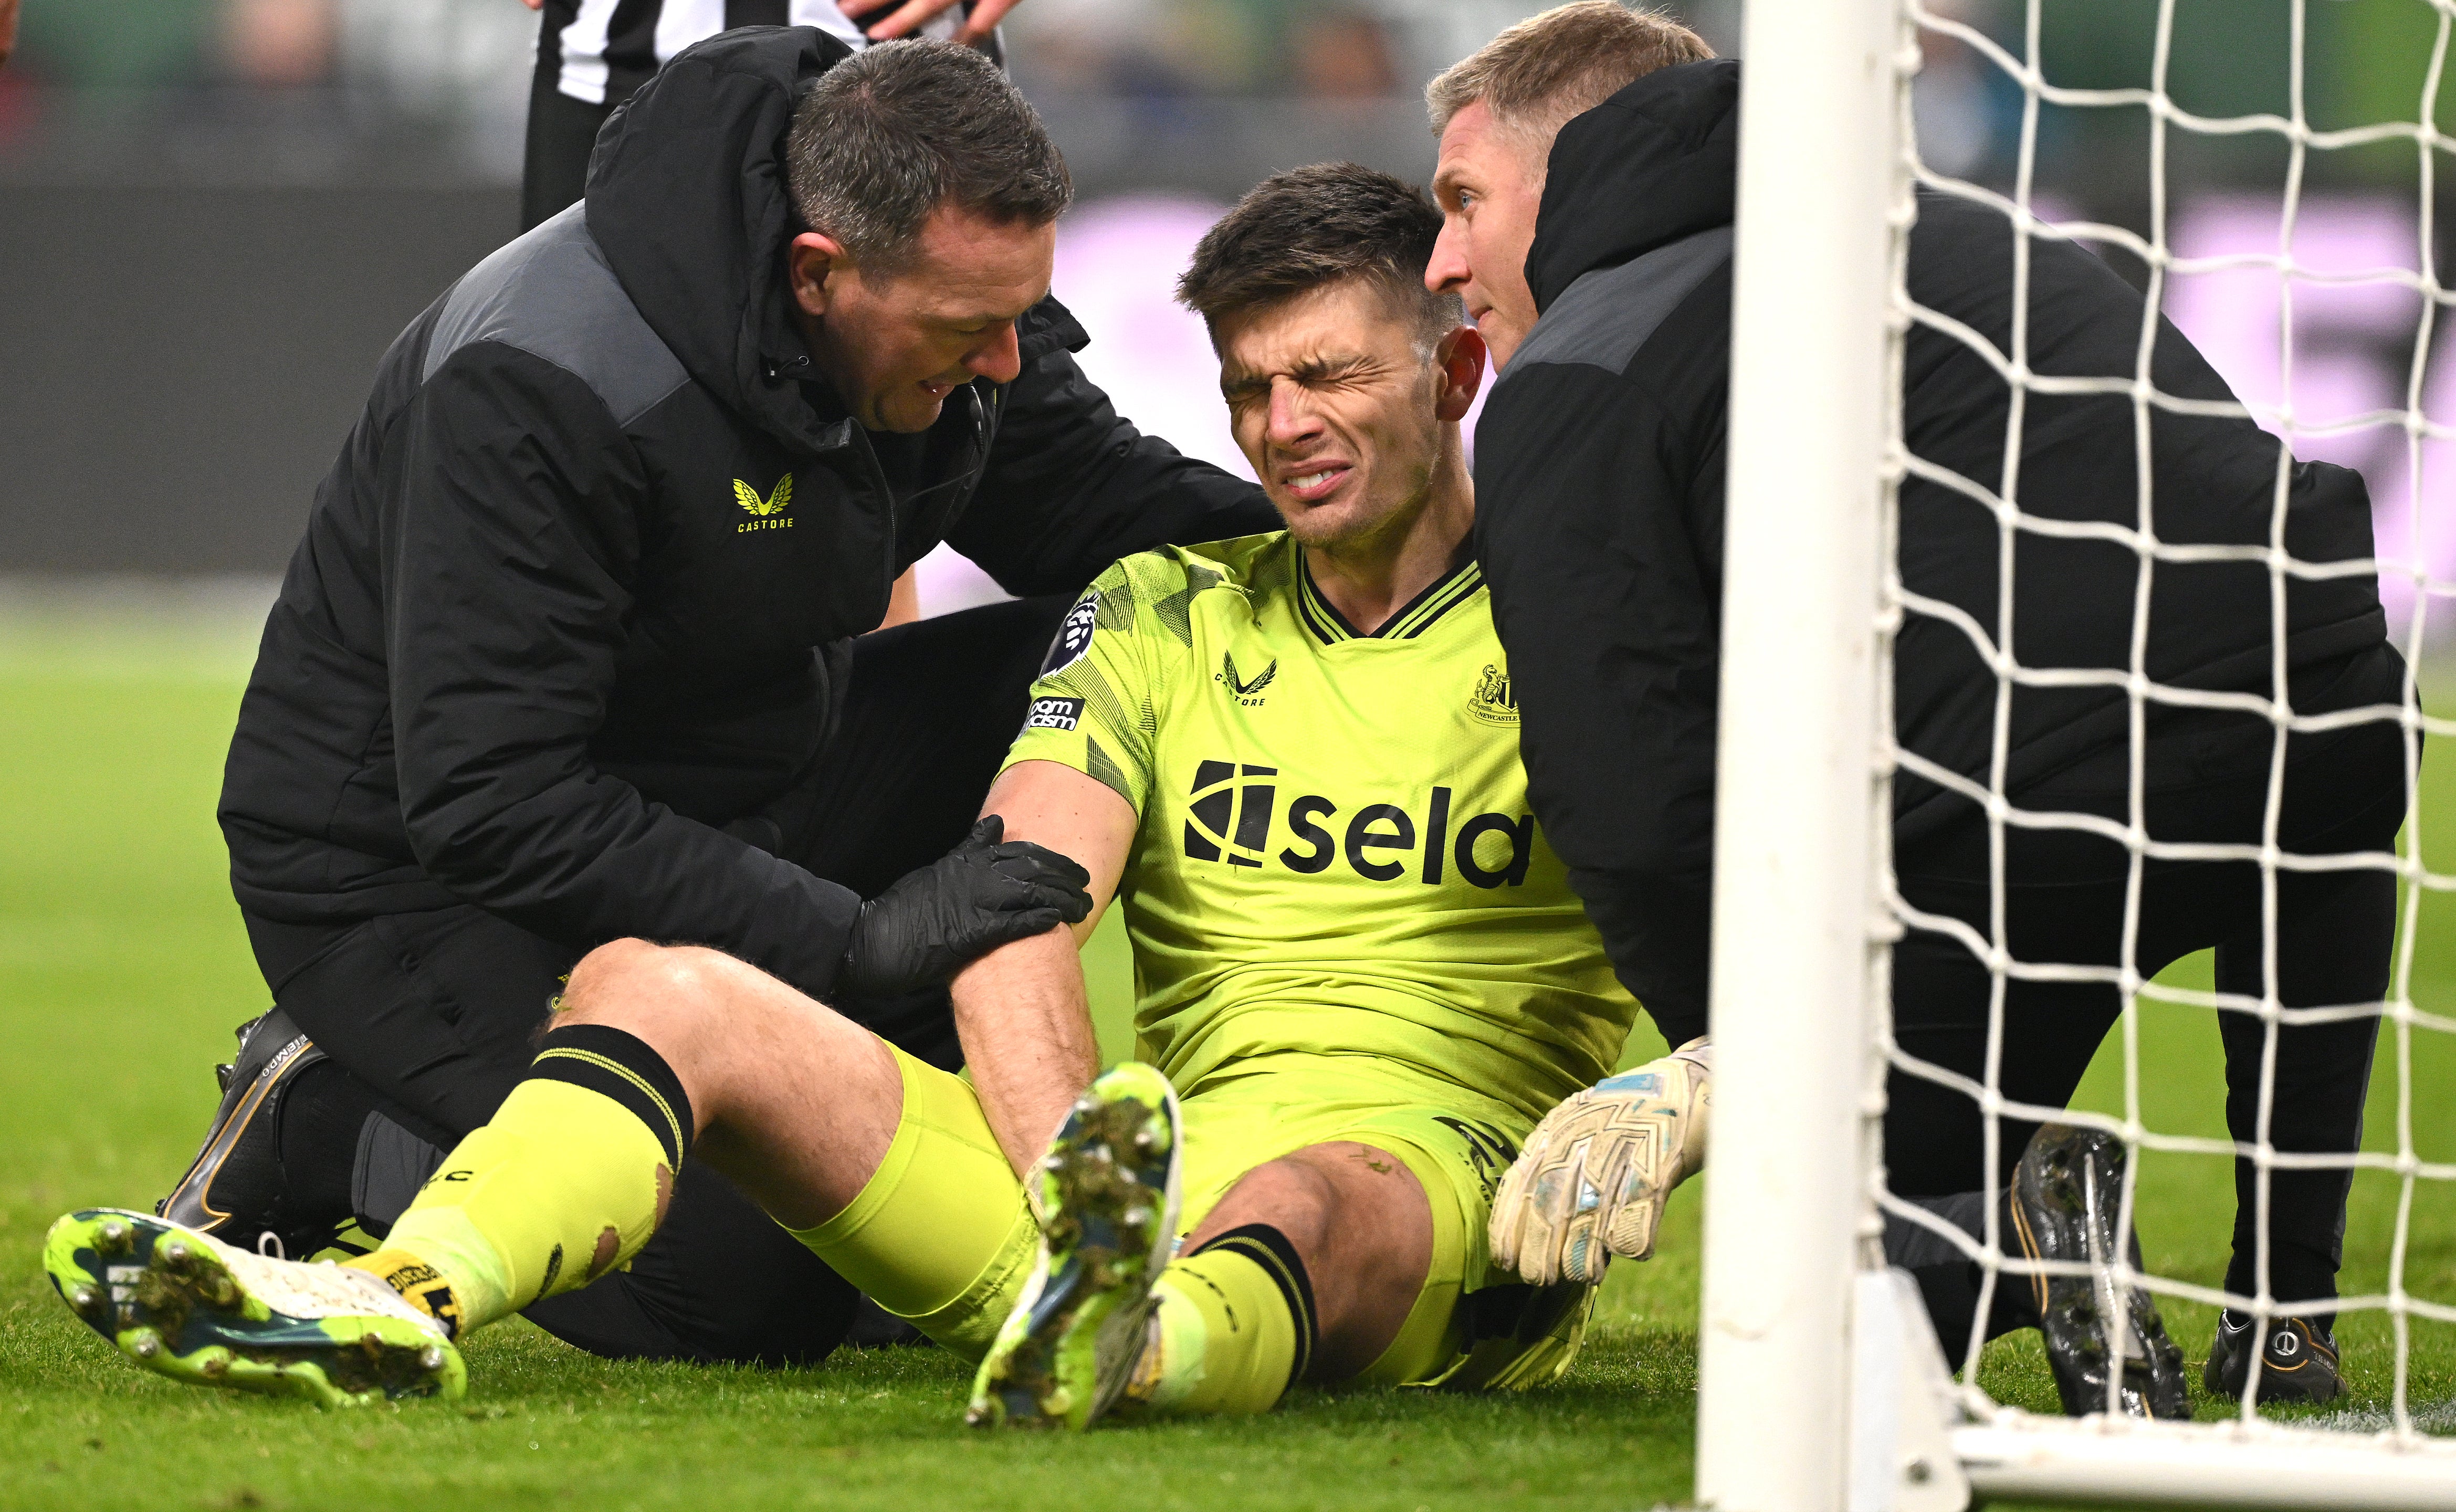 Nick Pope will require surgery after picking up a shoulder injury